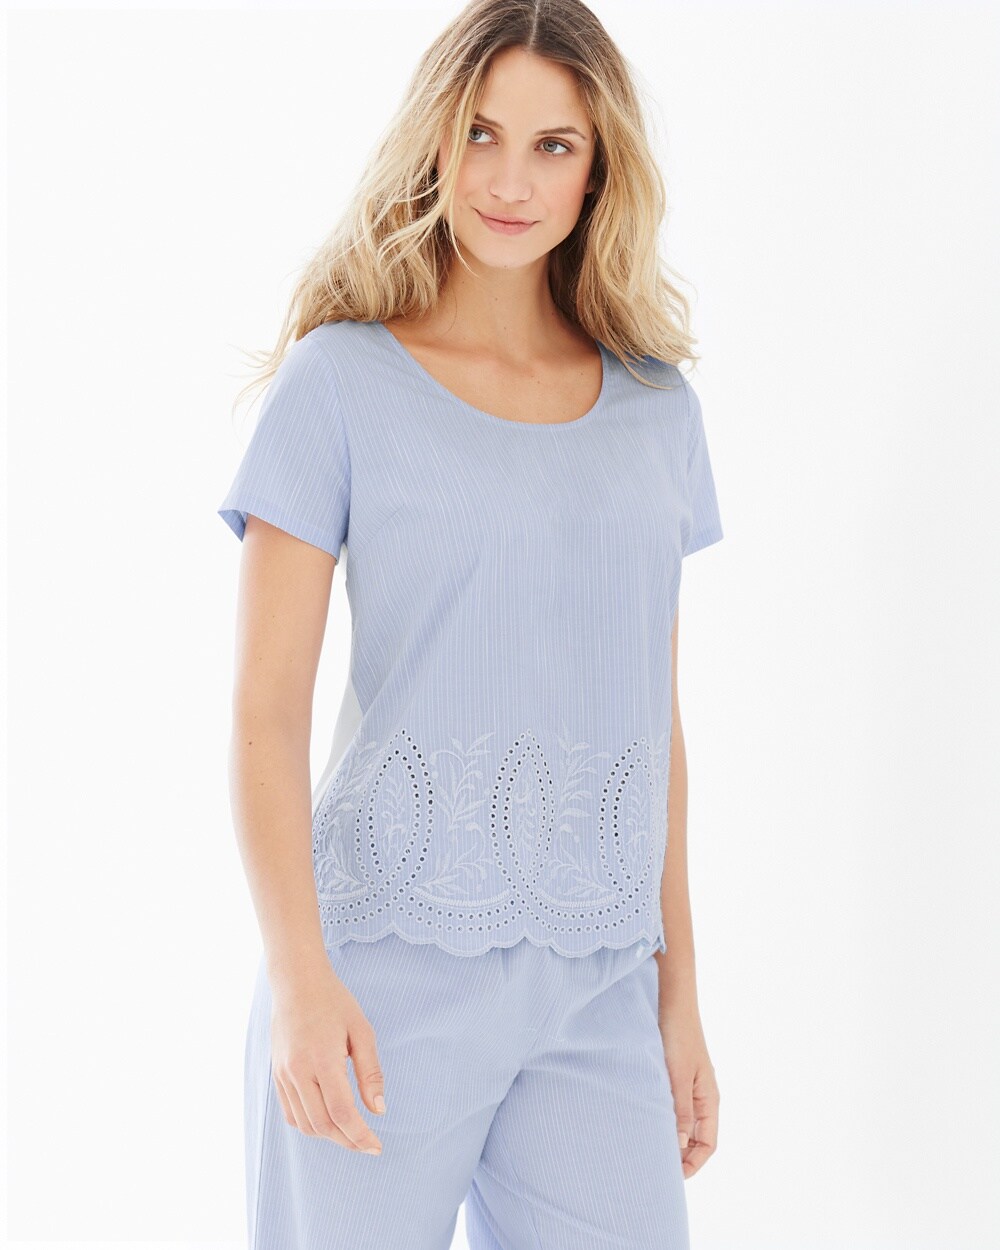 Cool Nights and Cotton Short Sleeve Pajama Top Impeccable Larkspur Border